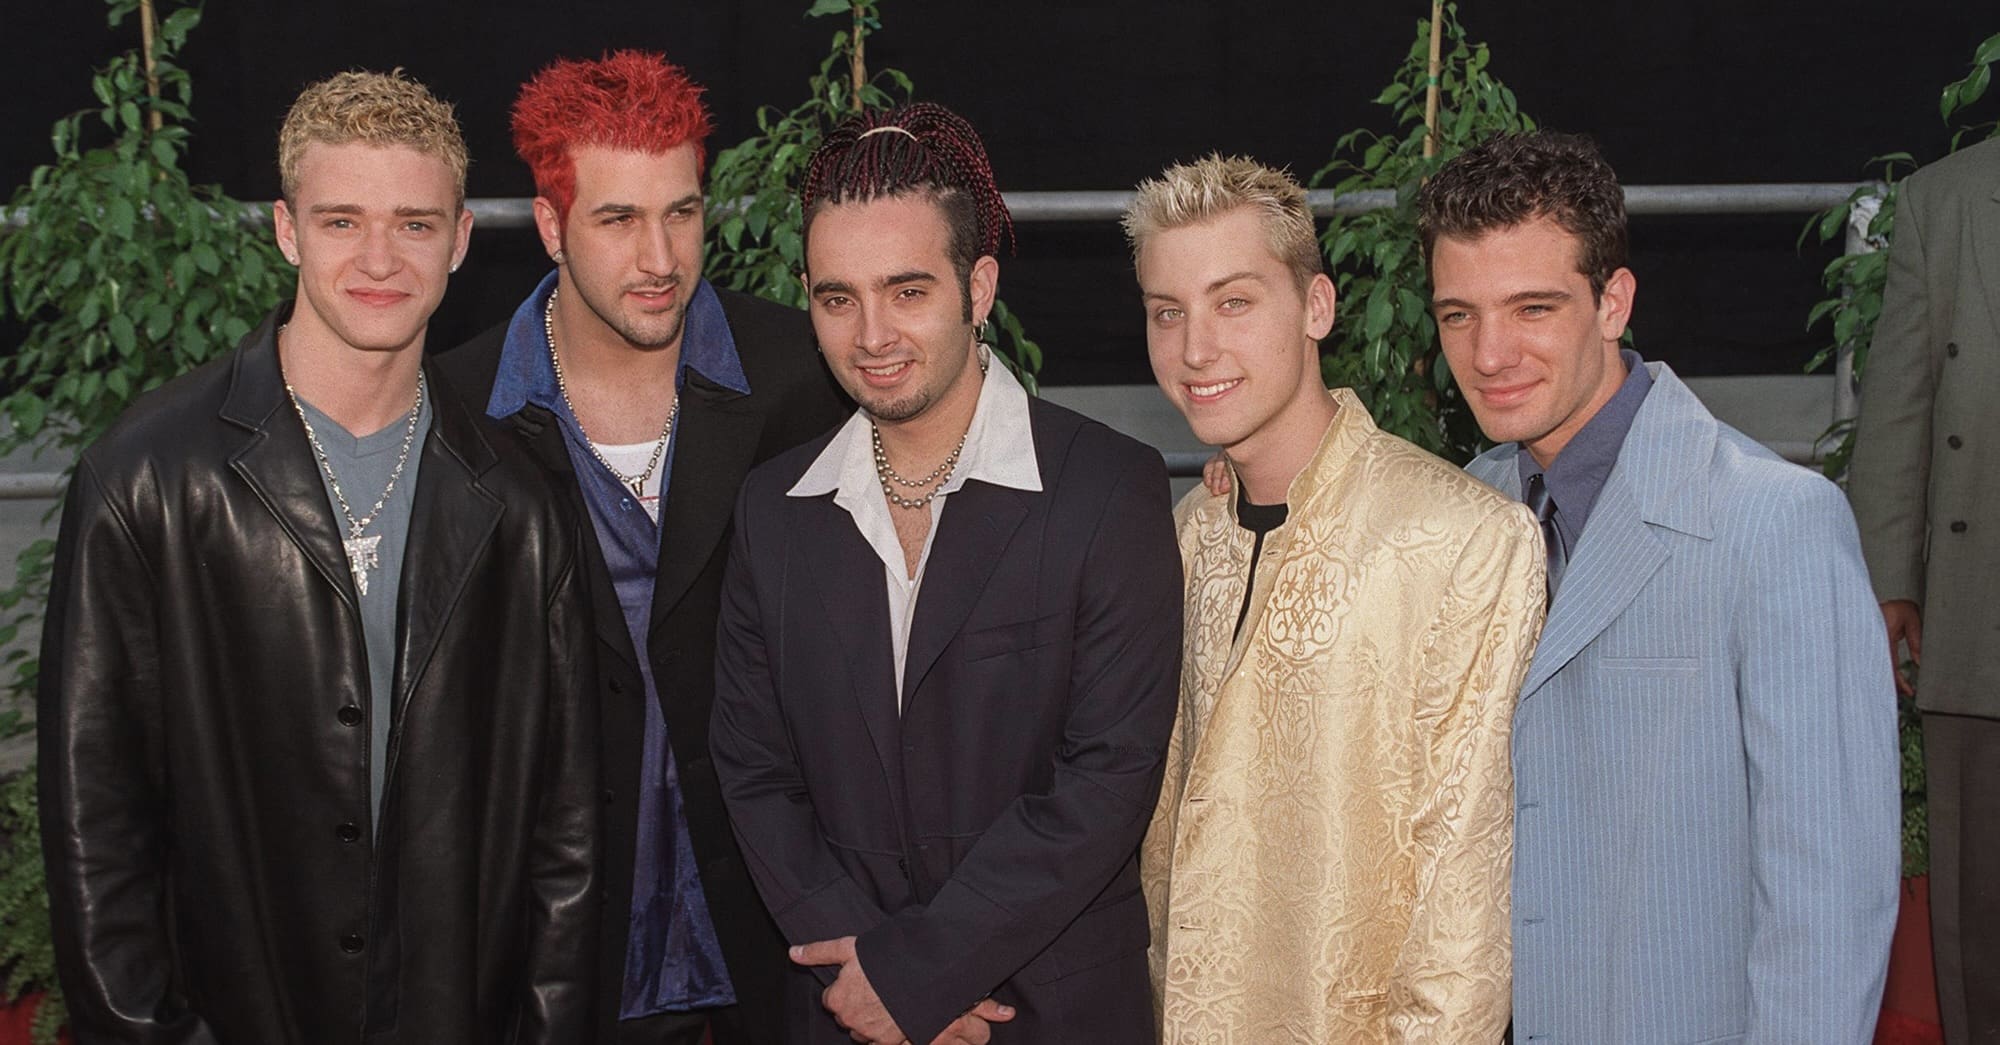 *NSYNC Set to Reunite with Justin Timberlake for Release of First Song in More Than 20 Years: Report